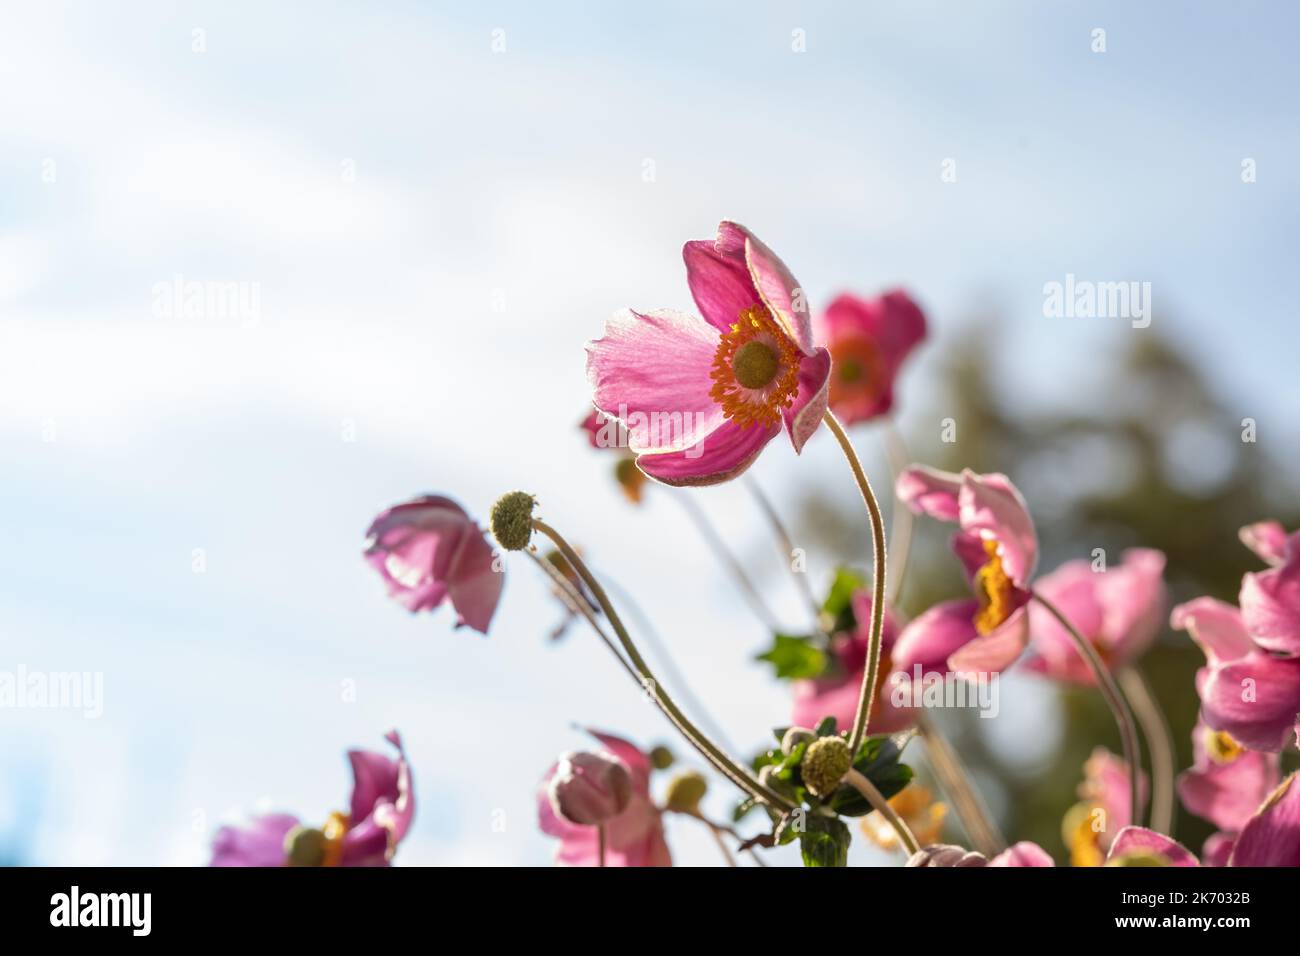 Gentle purple flowers of anemones on blue sky background. Minimalistic composition of nature beauty Stock Photo